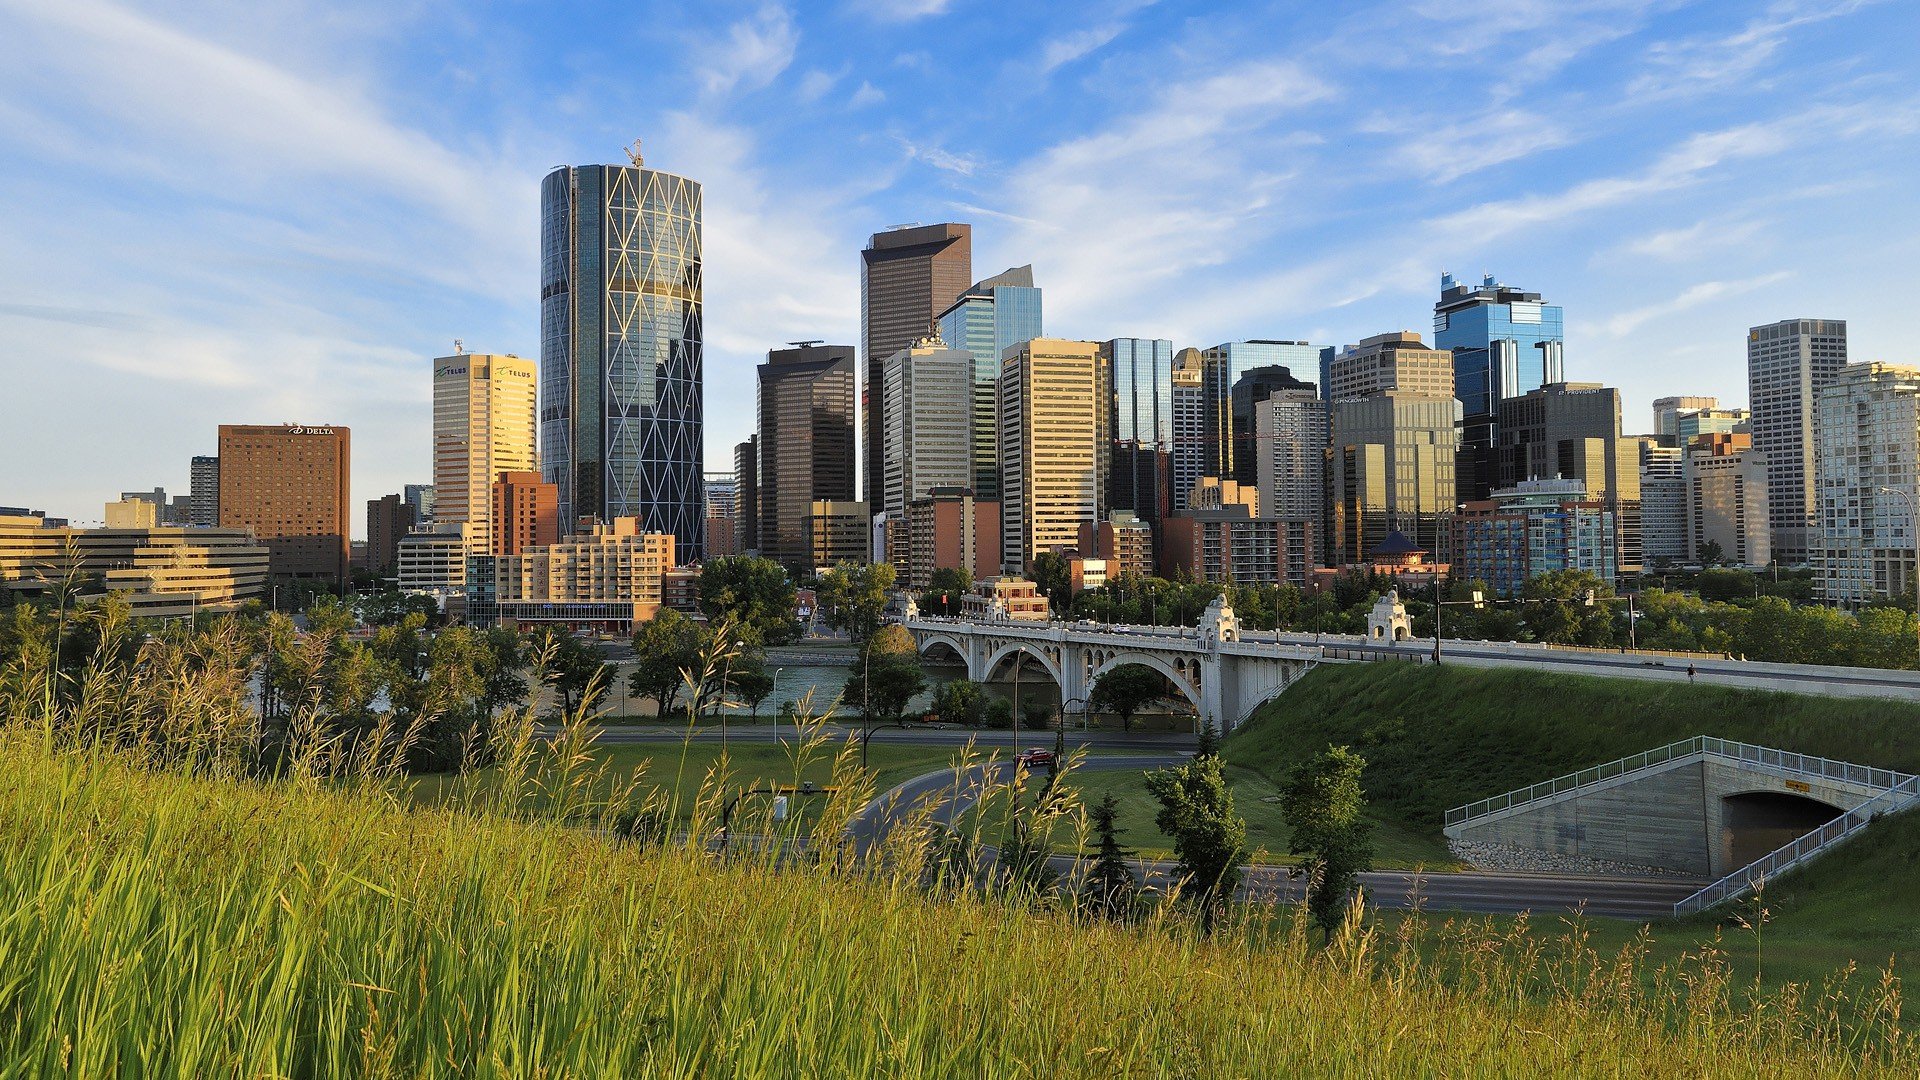 Adorable Calgary Picture in HD Quality